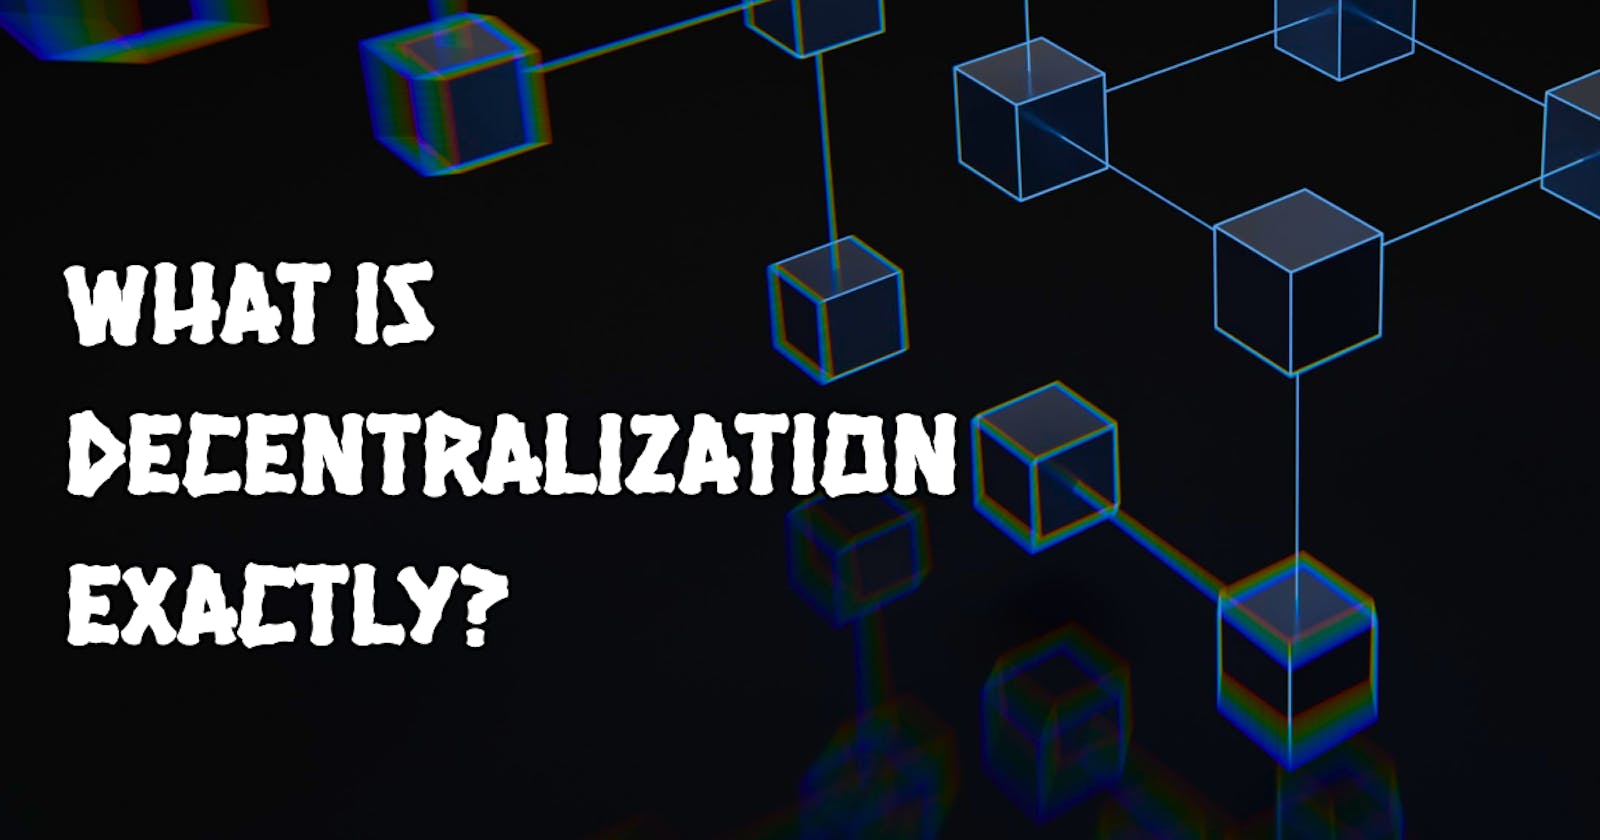 What is Decentralization exactly?